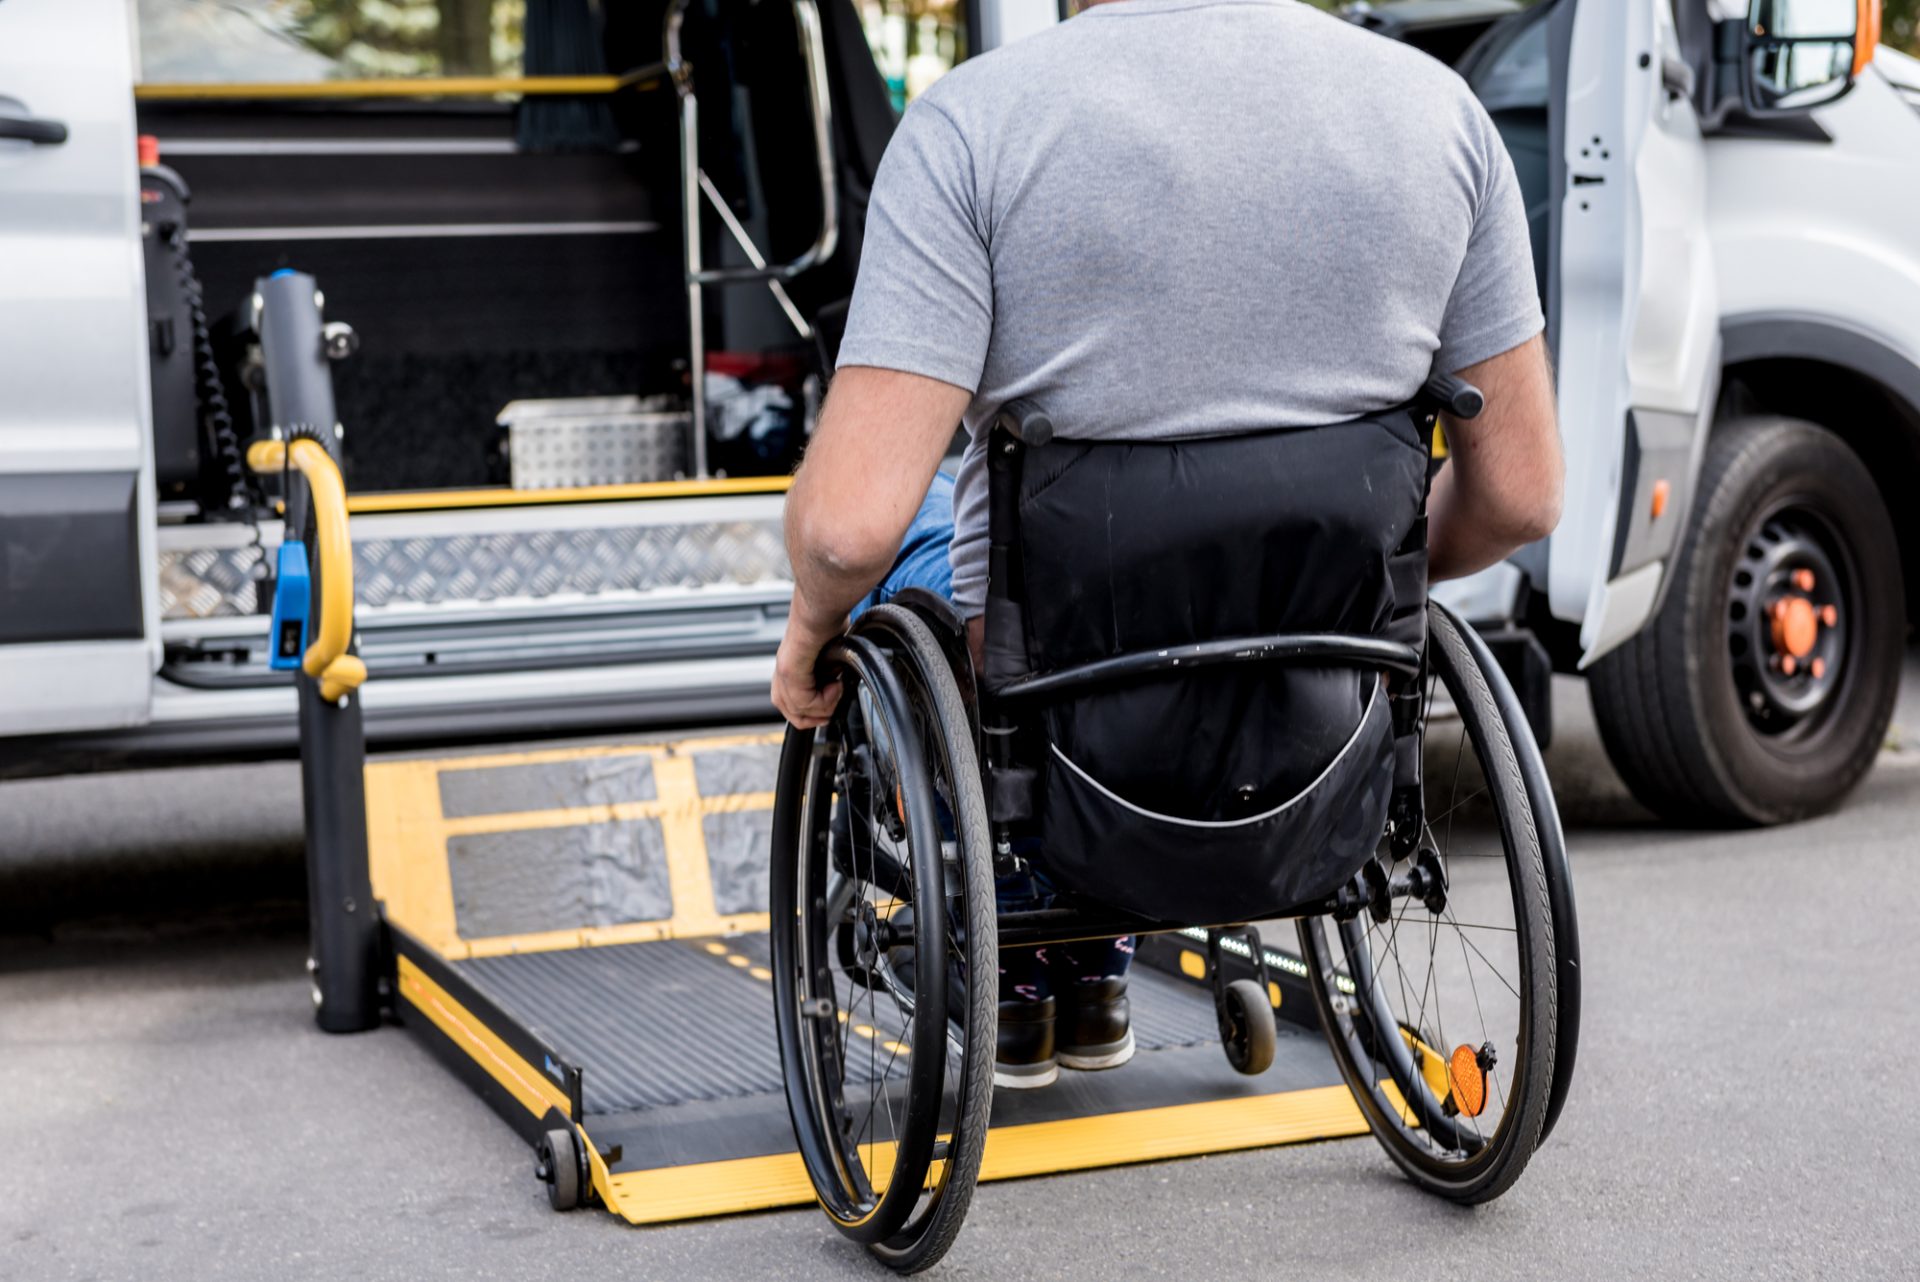 A man in a wheelchair on a lift of a vehicle